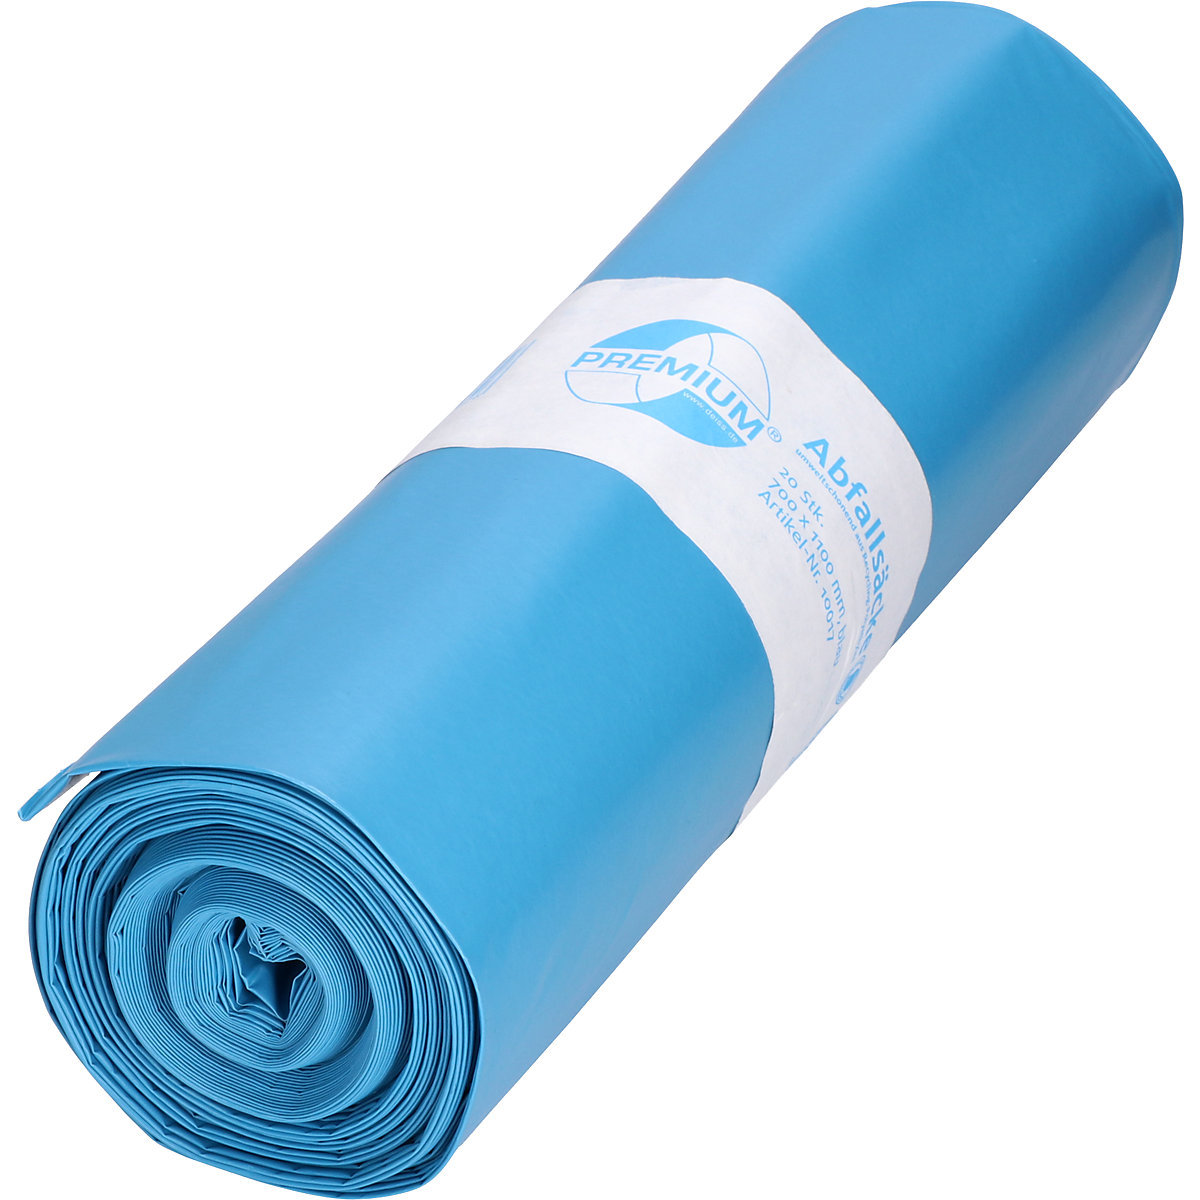 Heavy duty waste sacks LDPE, 120 l, WxH 700 x 1100 mm, material thickness 80 µm, blue, pack of 200-1